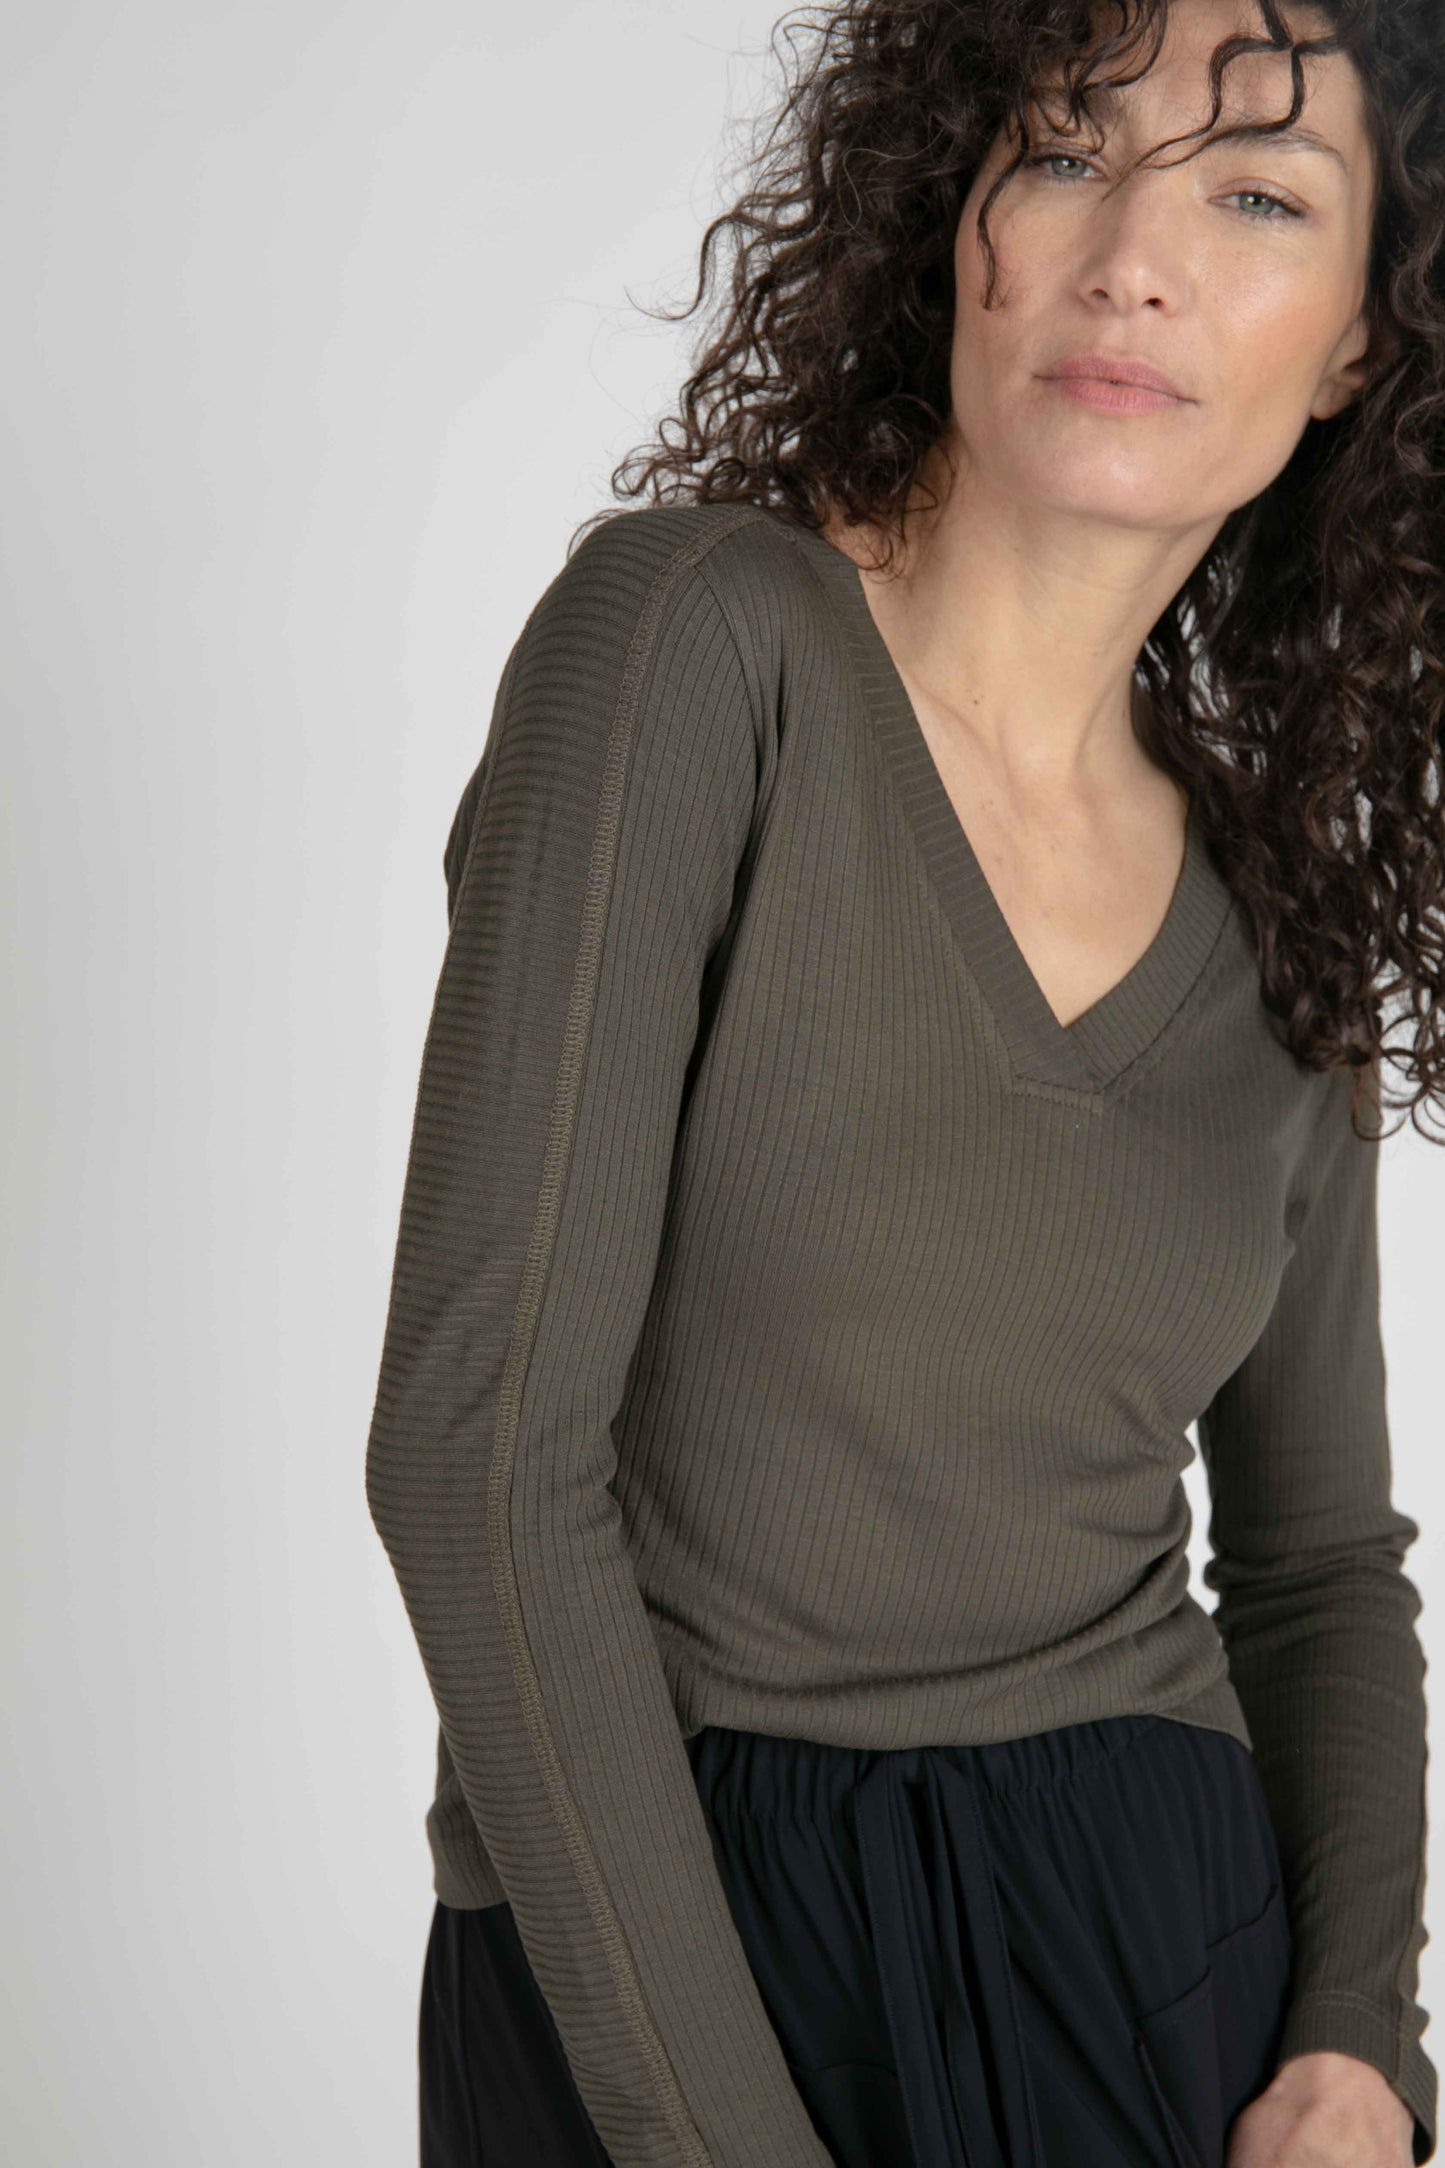 The Detail Oriented Fitted Top